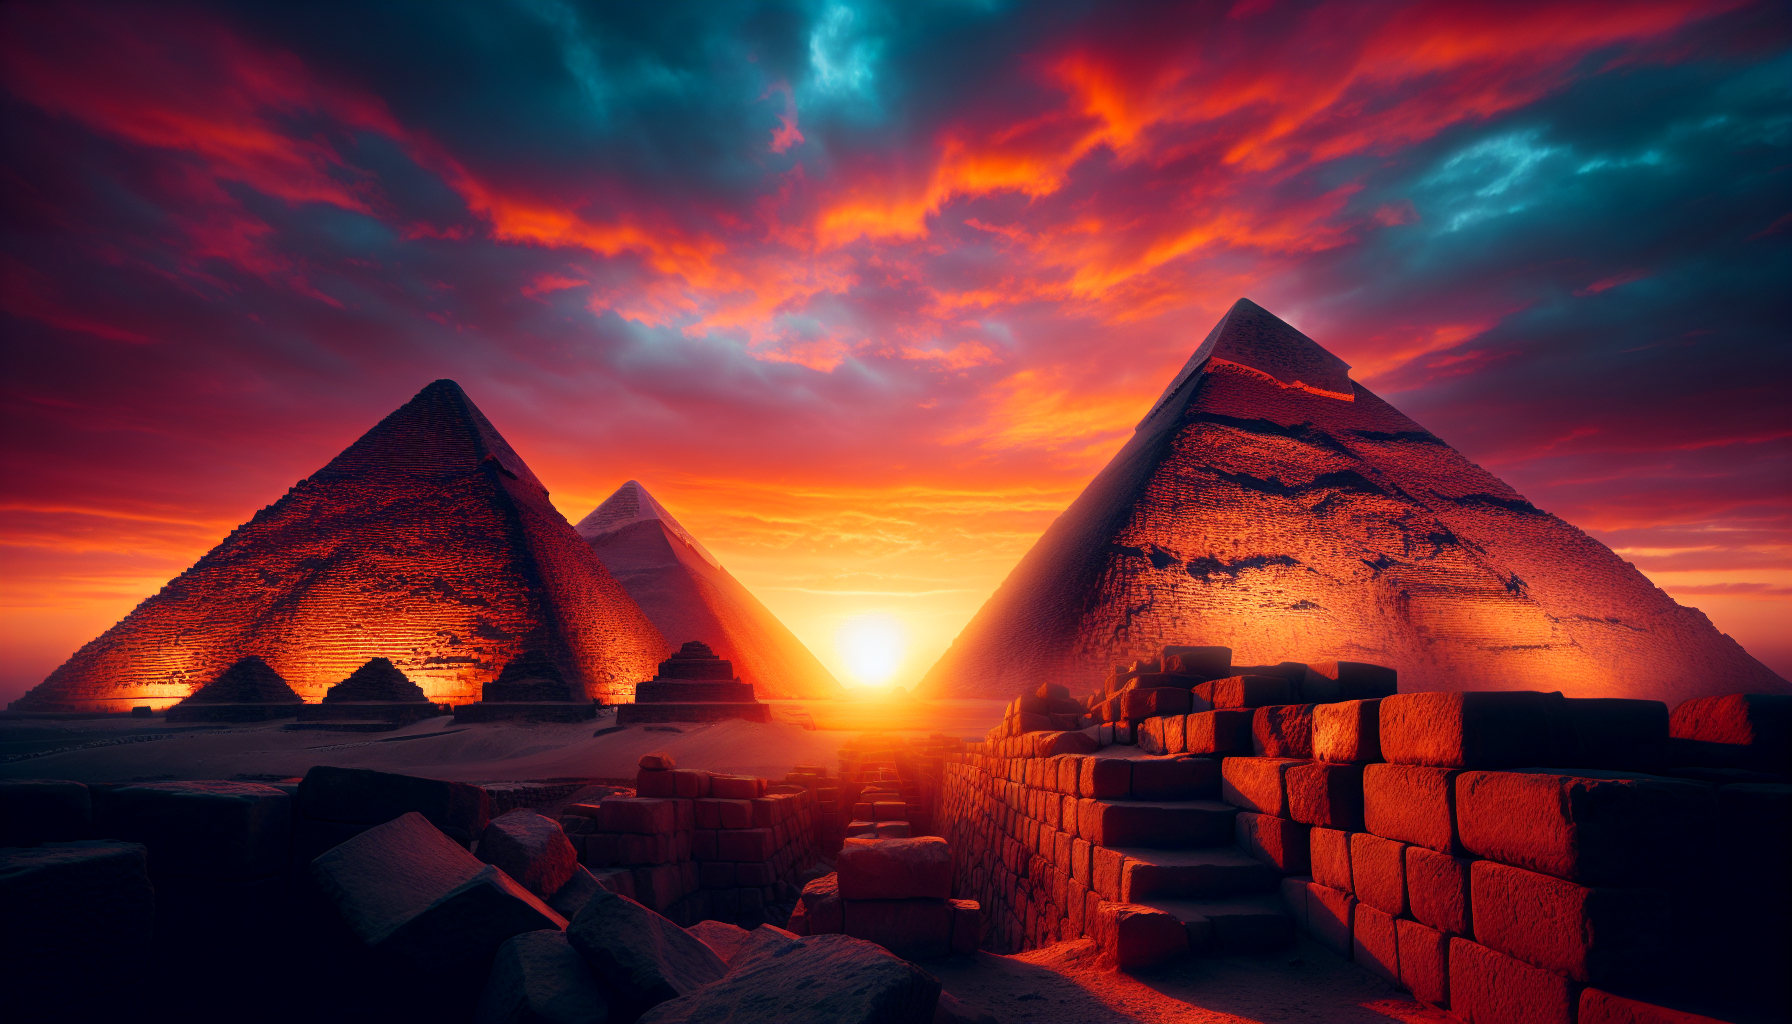 delve into the mystery of ancient pyramids and their potential connection to lost civilizations in this exploration of intriguing possibilities.